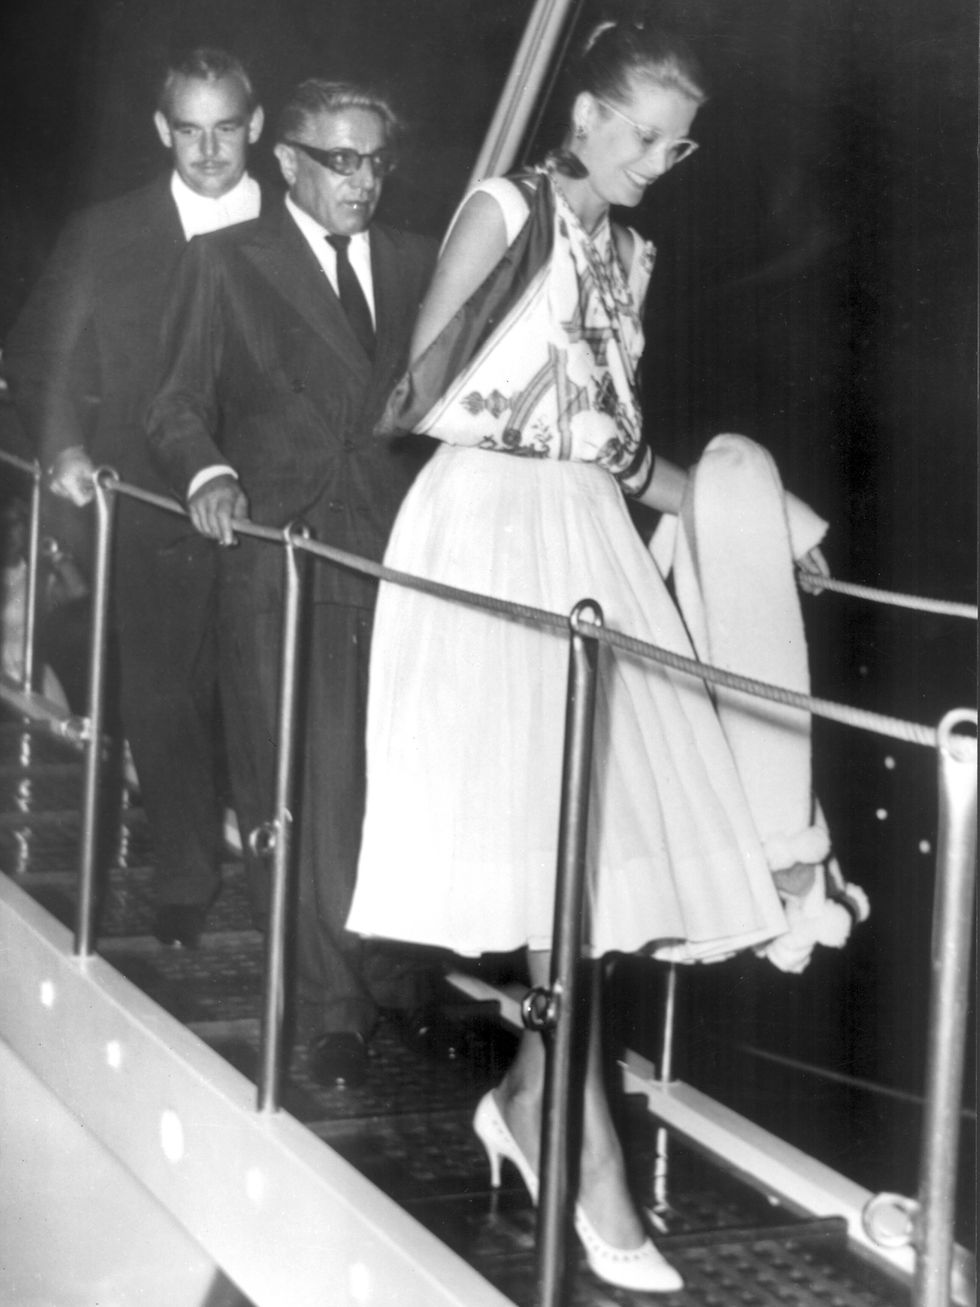 arisitotle onassis and prince rainier and princess grace kelly, aug 29, 1959  arisitotle onassis, prince rainier and princess grace kelly coming down the steps of the luxury yacht "christina" owned by onassis princess grace has her arm in sling due to a wasp sting whilst out at sea monte carlo   29th august 1959 photo by topfotoaflo 3619